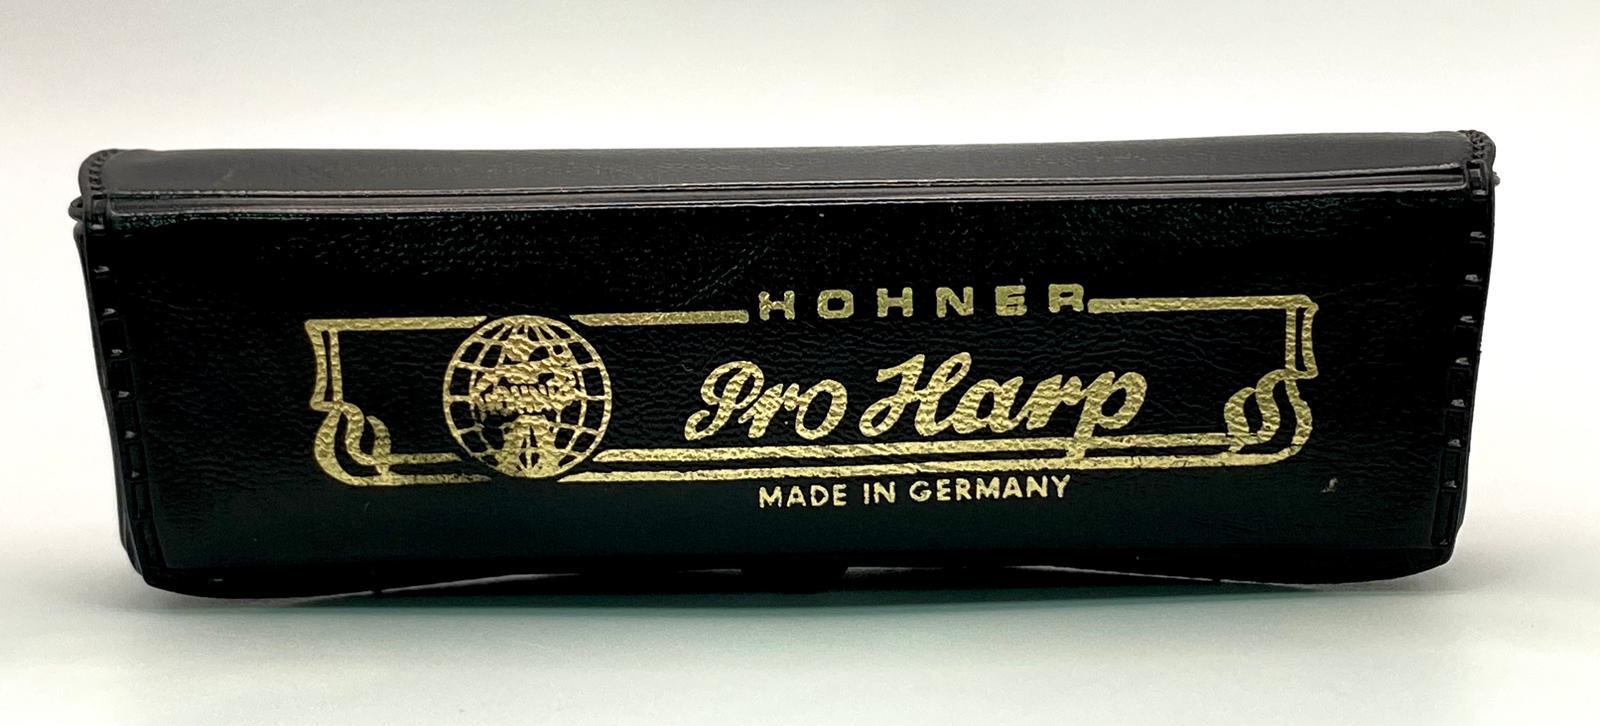 Four Vintage Harmonicas - Two German Pro Harps and Two Miniatures! - Image 8 of 8